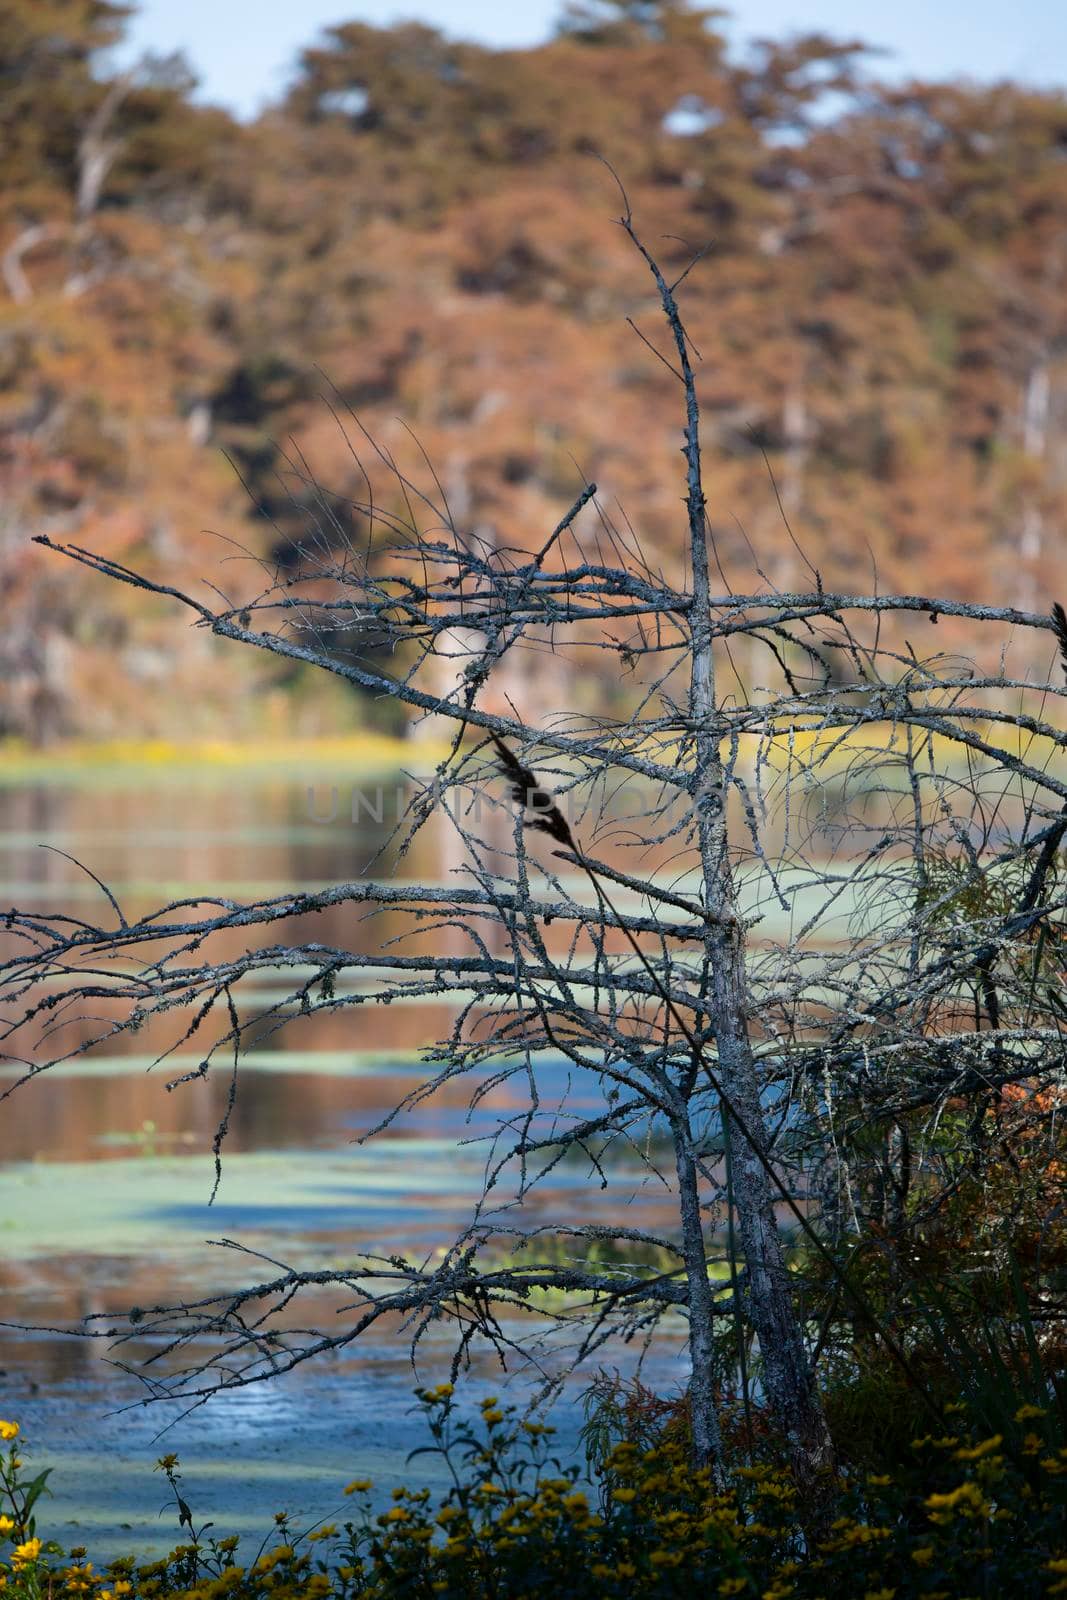 Fall foliage blocking an out of focus swampy lake and lake shore